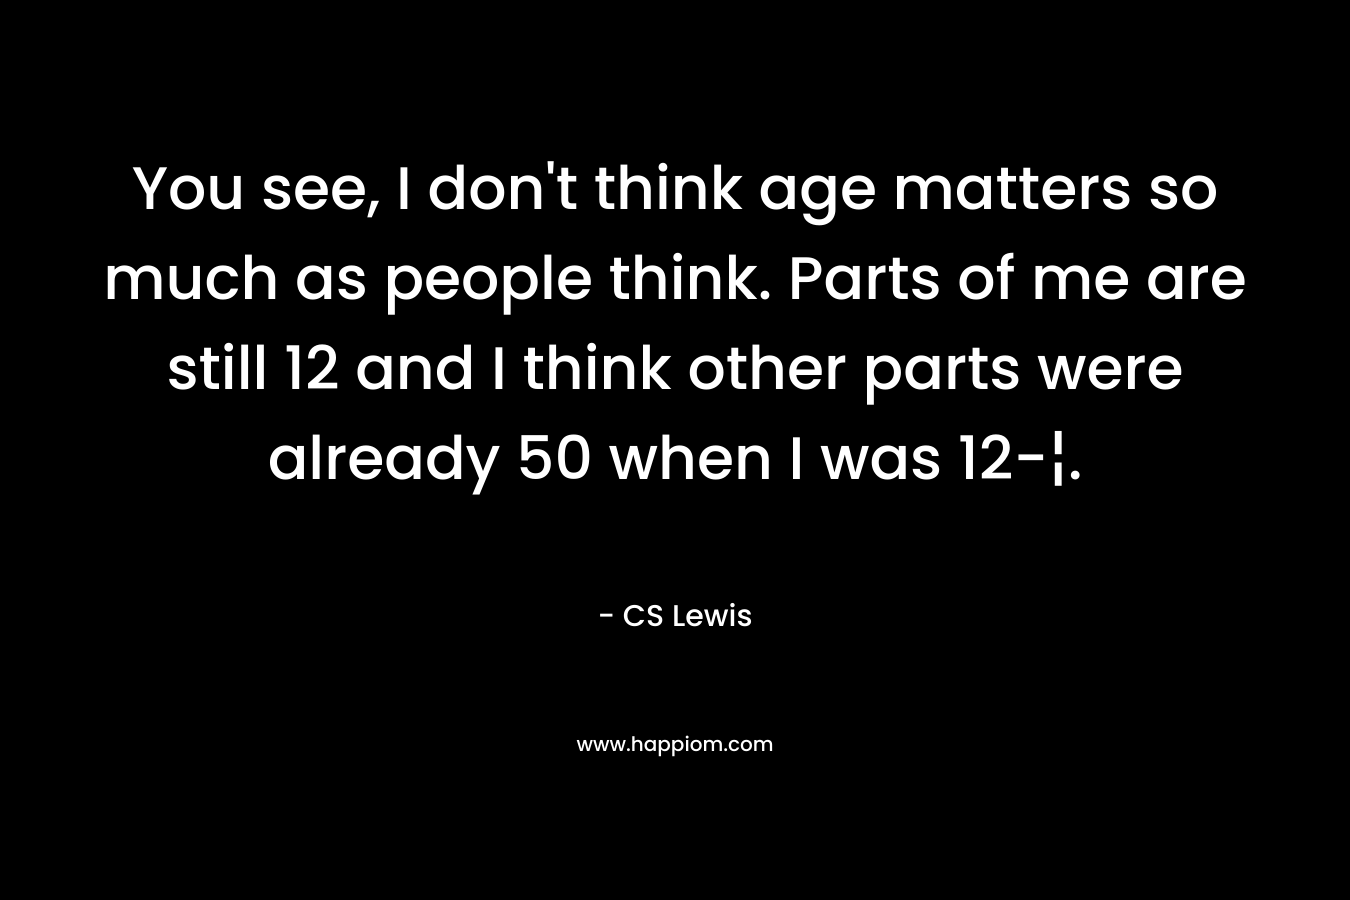 You see, I don't think age matters so much as people think. Parts of me are still 12 and I think other parts were already 50 when I was 12-¦.